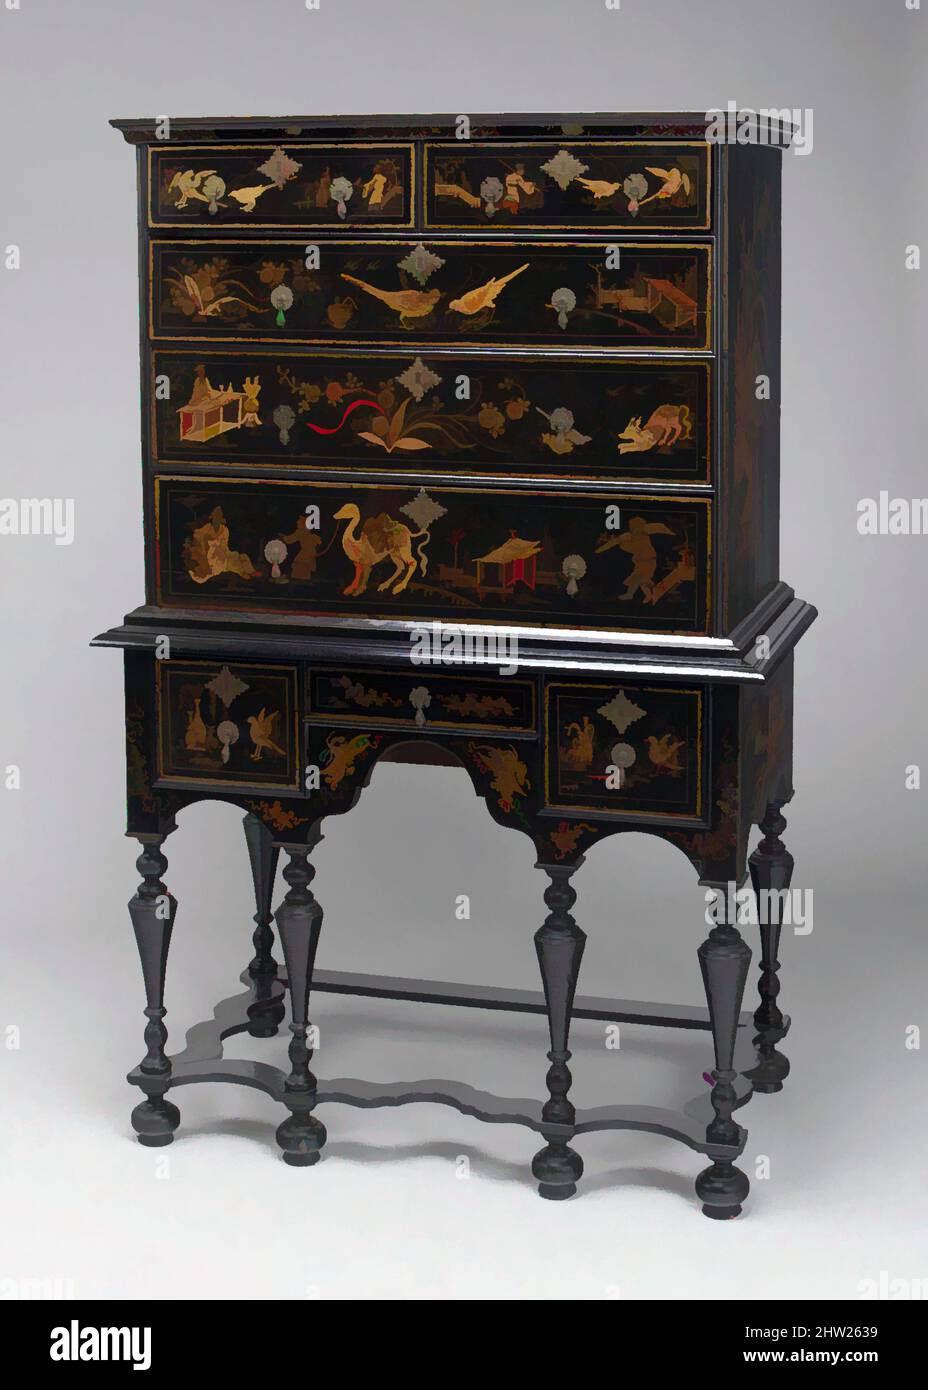 Art inspired by High chest of drawers, 1710–30, Made in Boston, Massachusetts, United States, American, Japanned soft maple, poplar, white pine, 62 1/2 x 39 1/2 x 21 1/4 in. (158.8 x 100.3 x 54 cm), Furniture, Japanning, a Western imitation of oriental lacquerwork, became fashionable, Classic works modernized by Artotop with a splash of modernity. Shapes, color and value, eye-catching visual impact on art. Emotions through freedom of artworks in a contemporary way. A timeless message pursuing a wildly creative new direction. Artists turning to the digital medium and creating the Artotop NFT Stock Photo